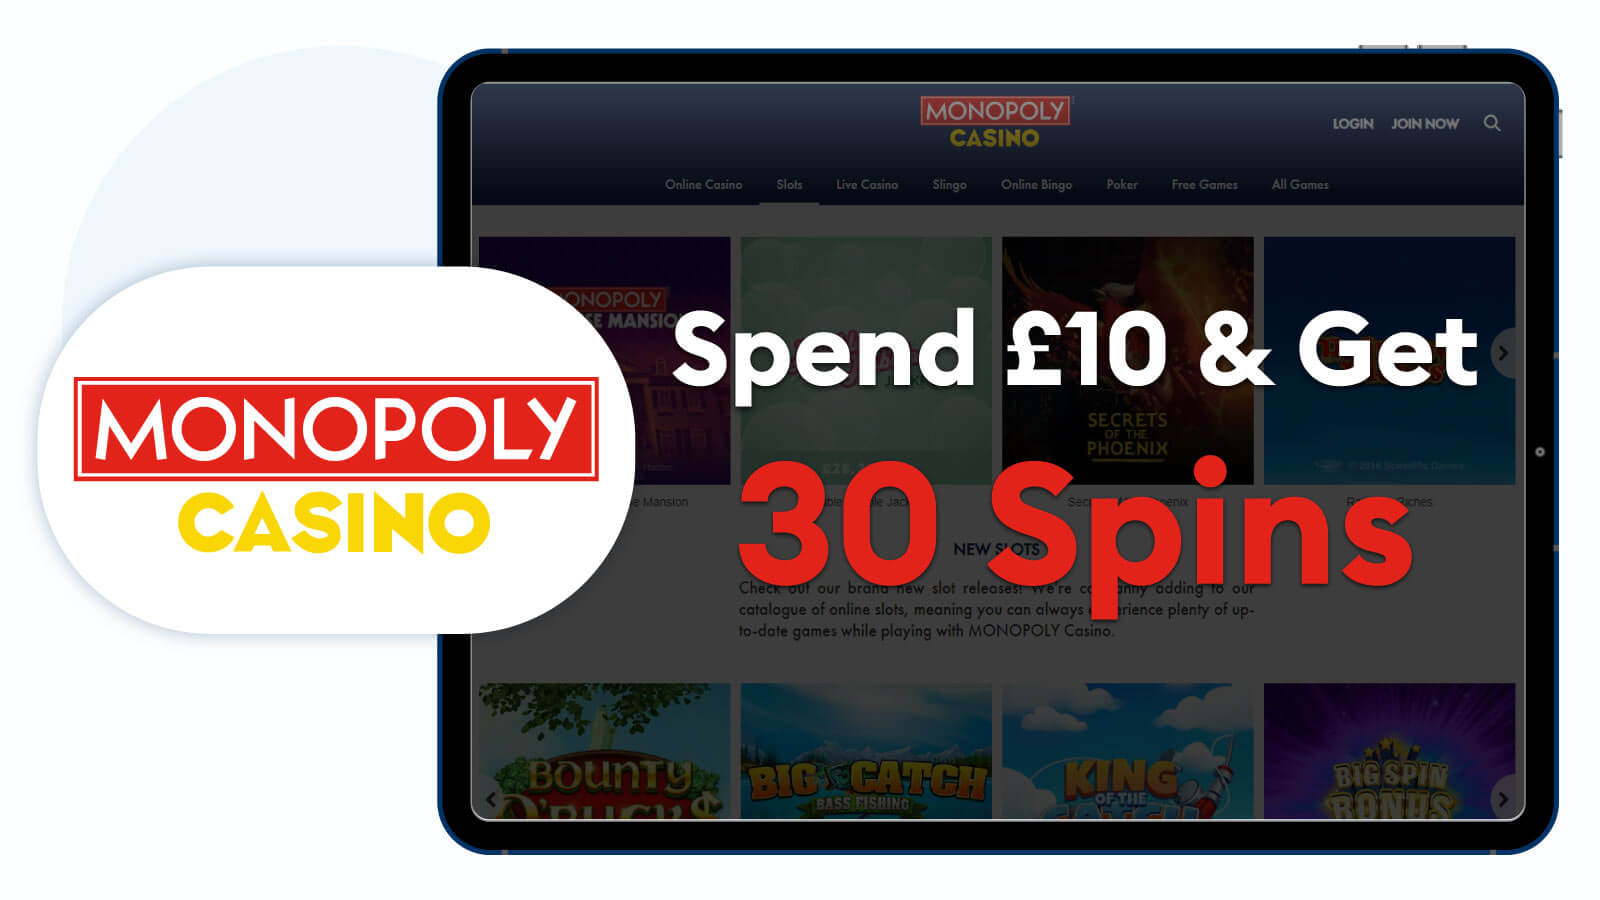 Monopoly Casino Spend £10 and Get 30 Free Spins